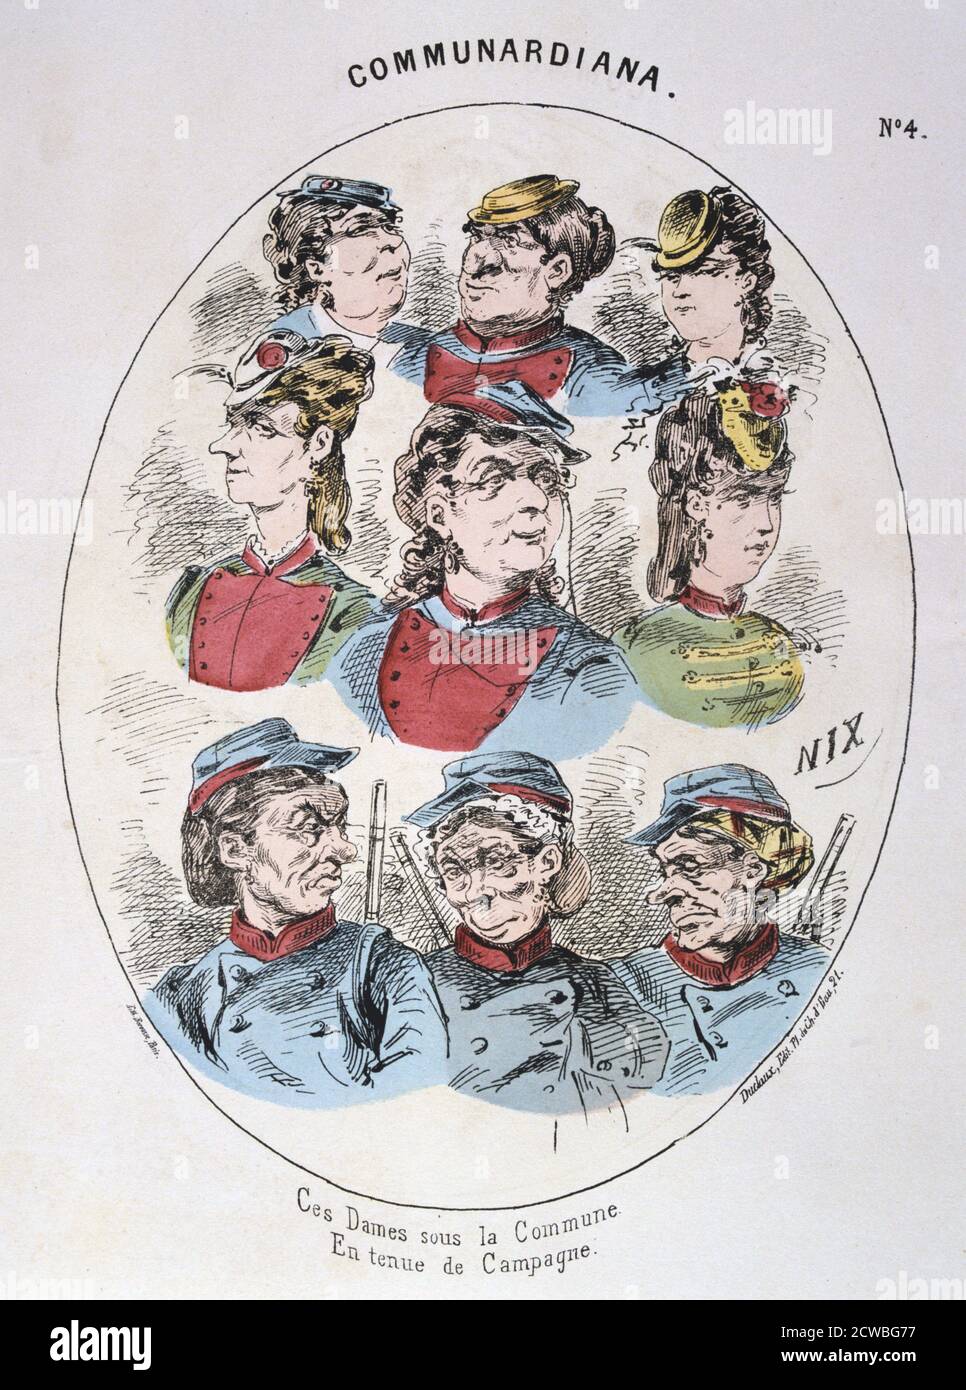 Les Beaux Jours de la Commune', 1871. Cartoon from a series on the subject of the Paris Commune of March to May 1871 titled Communardiana. From a private collection. Stock Photo